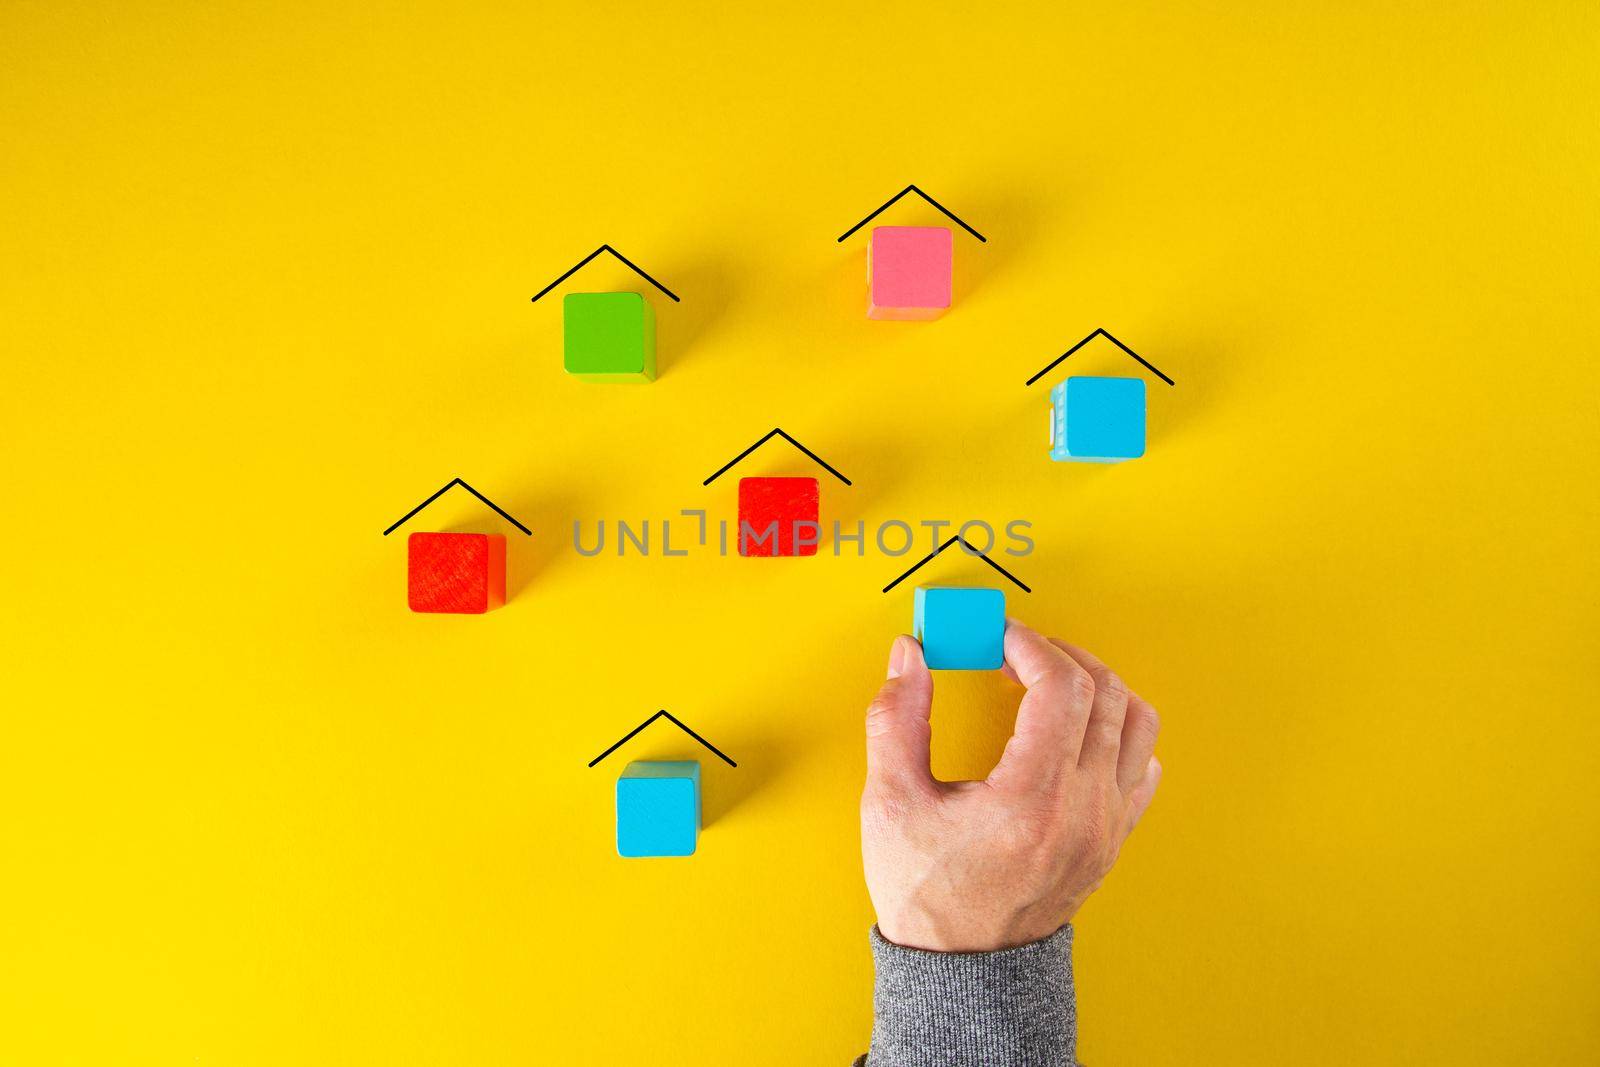 Male hand making many houses of wooden blocks in a conceptual image of urban planning and real estate.